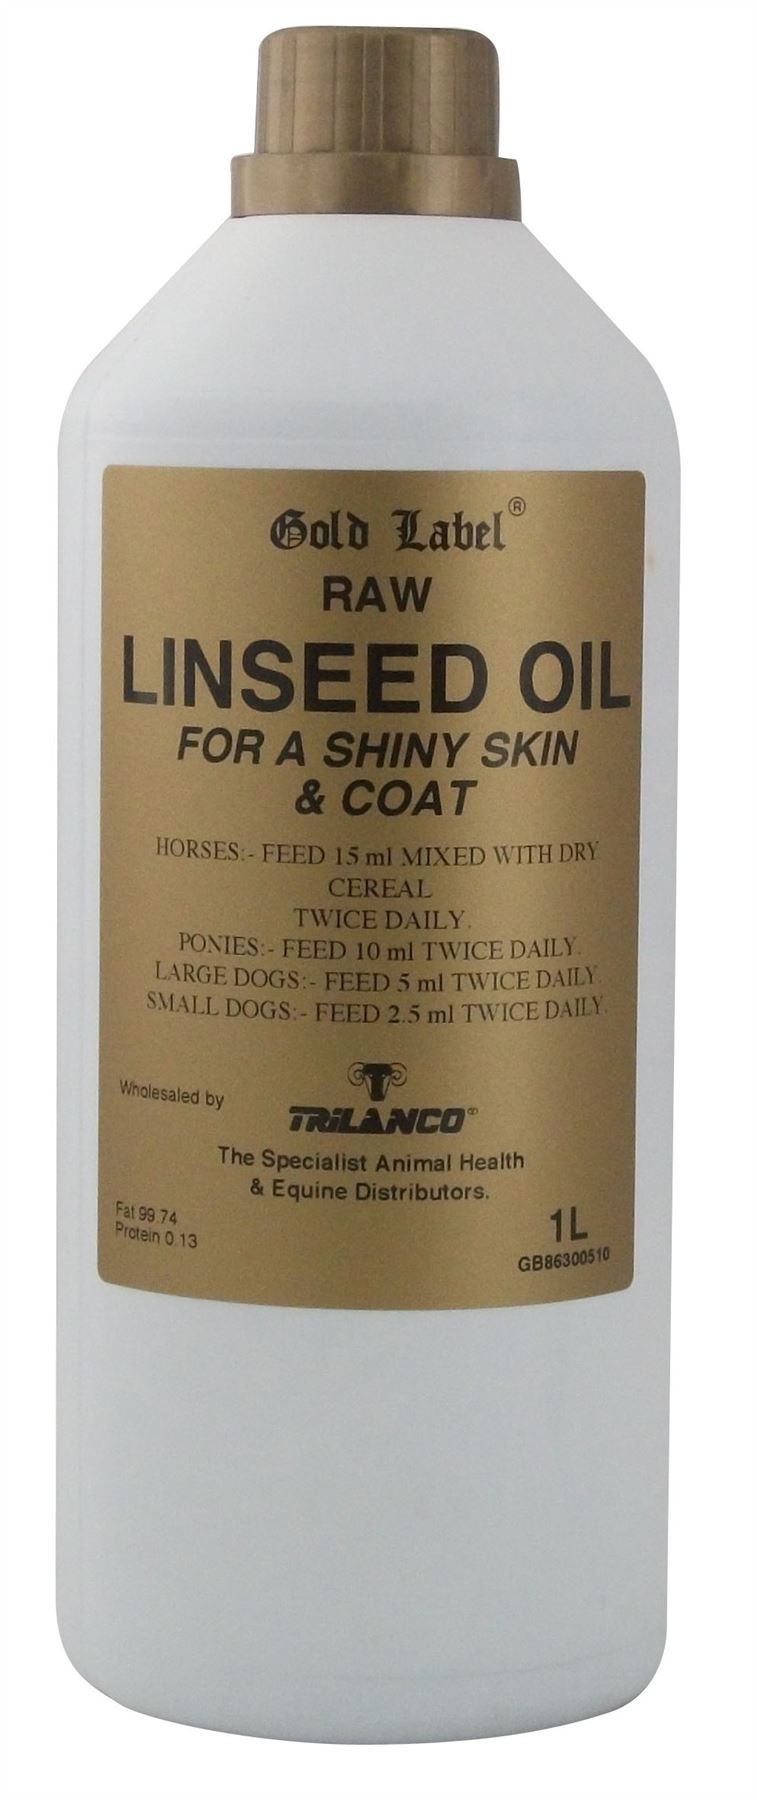 Gold Label Linseed Oil - Just Horse Riders